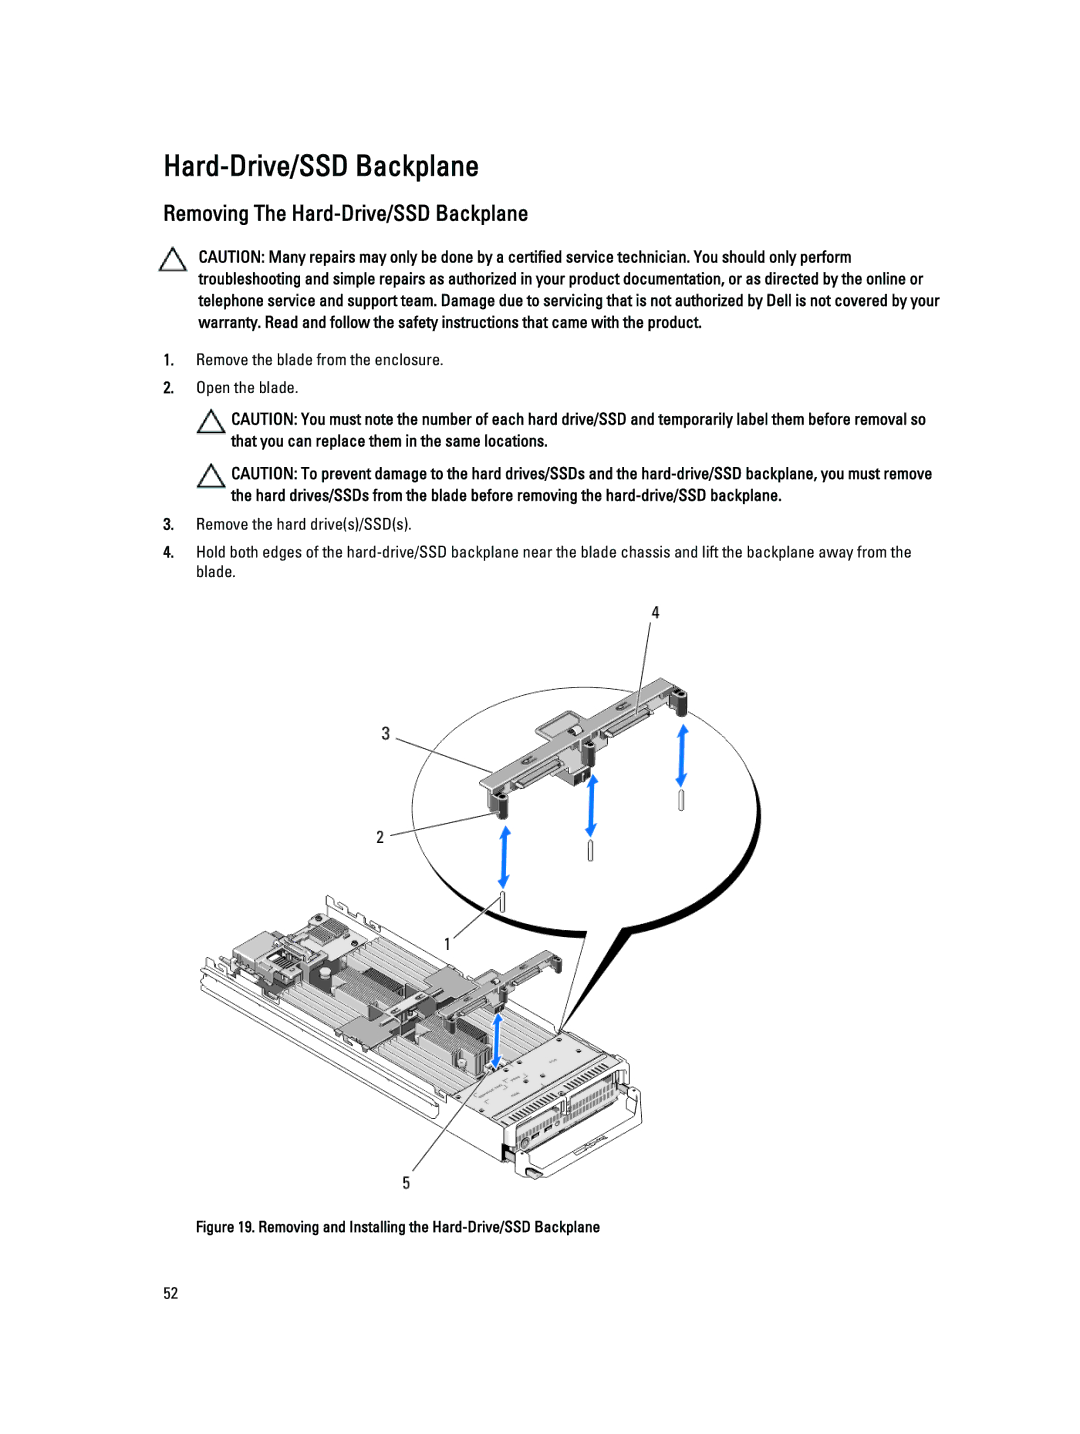 Dell M620 owner manual Removing The Hard-Drive/SSD Backplane 